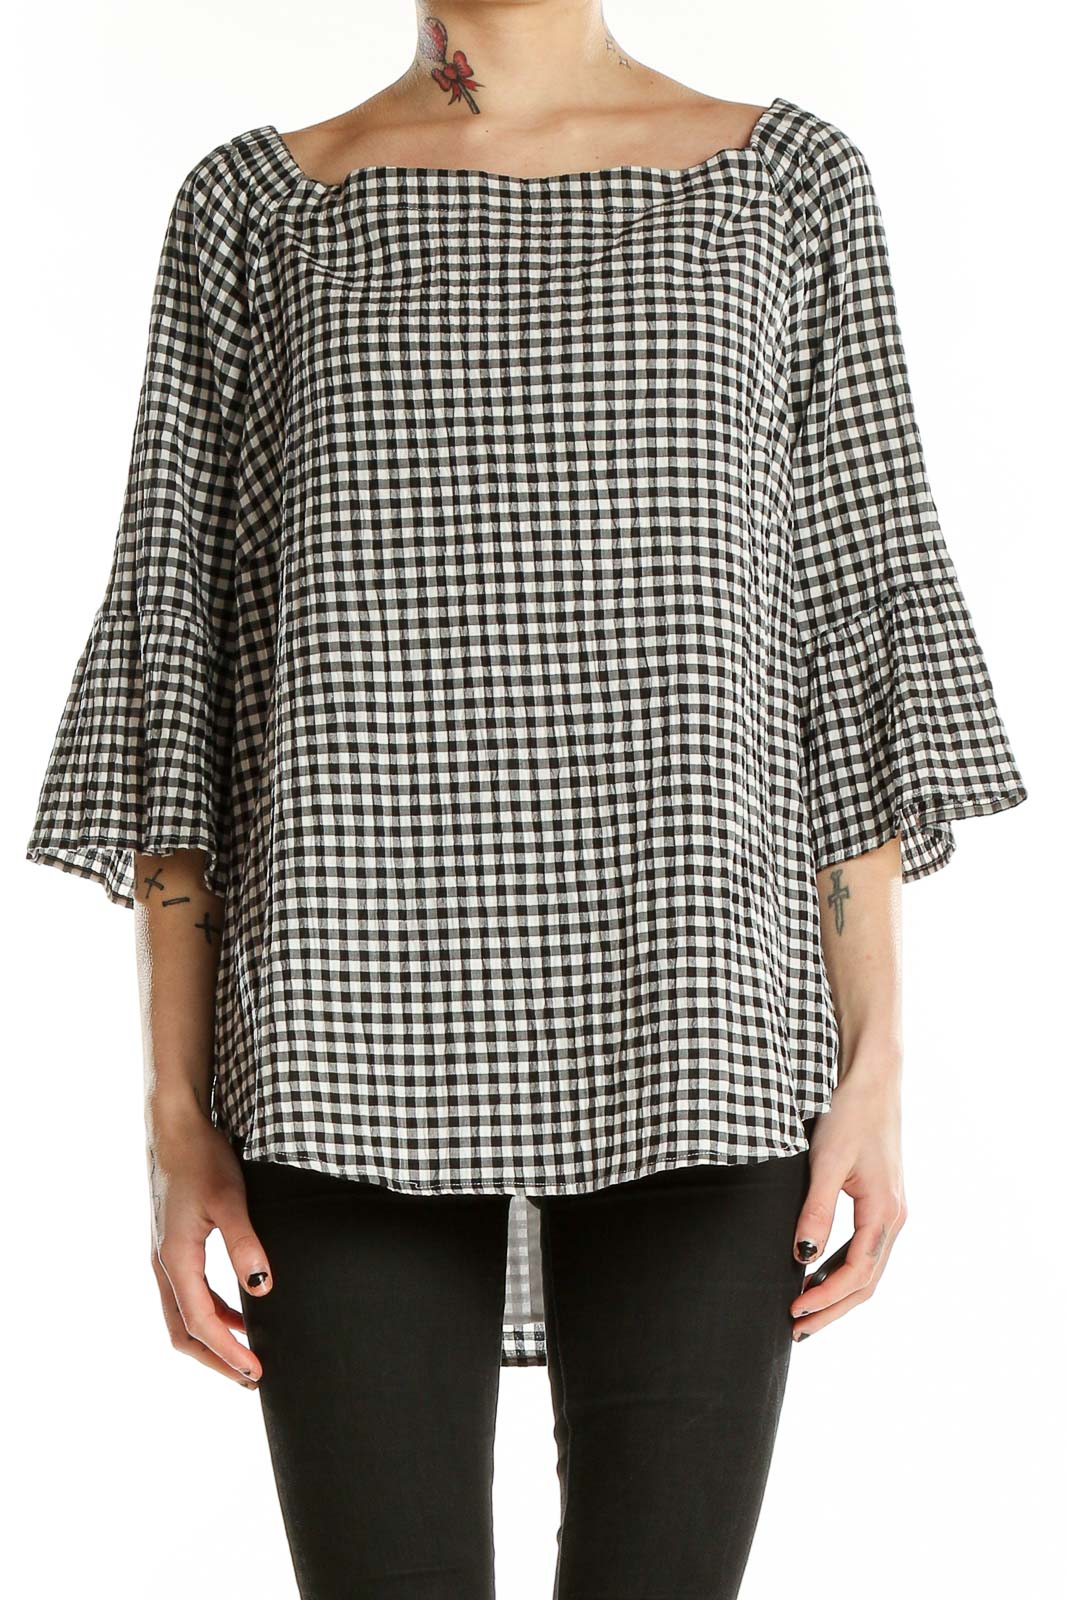 Black White Houndstooth Top Front